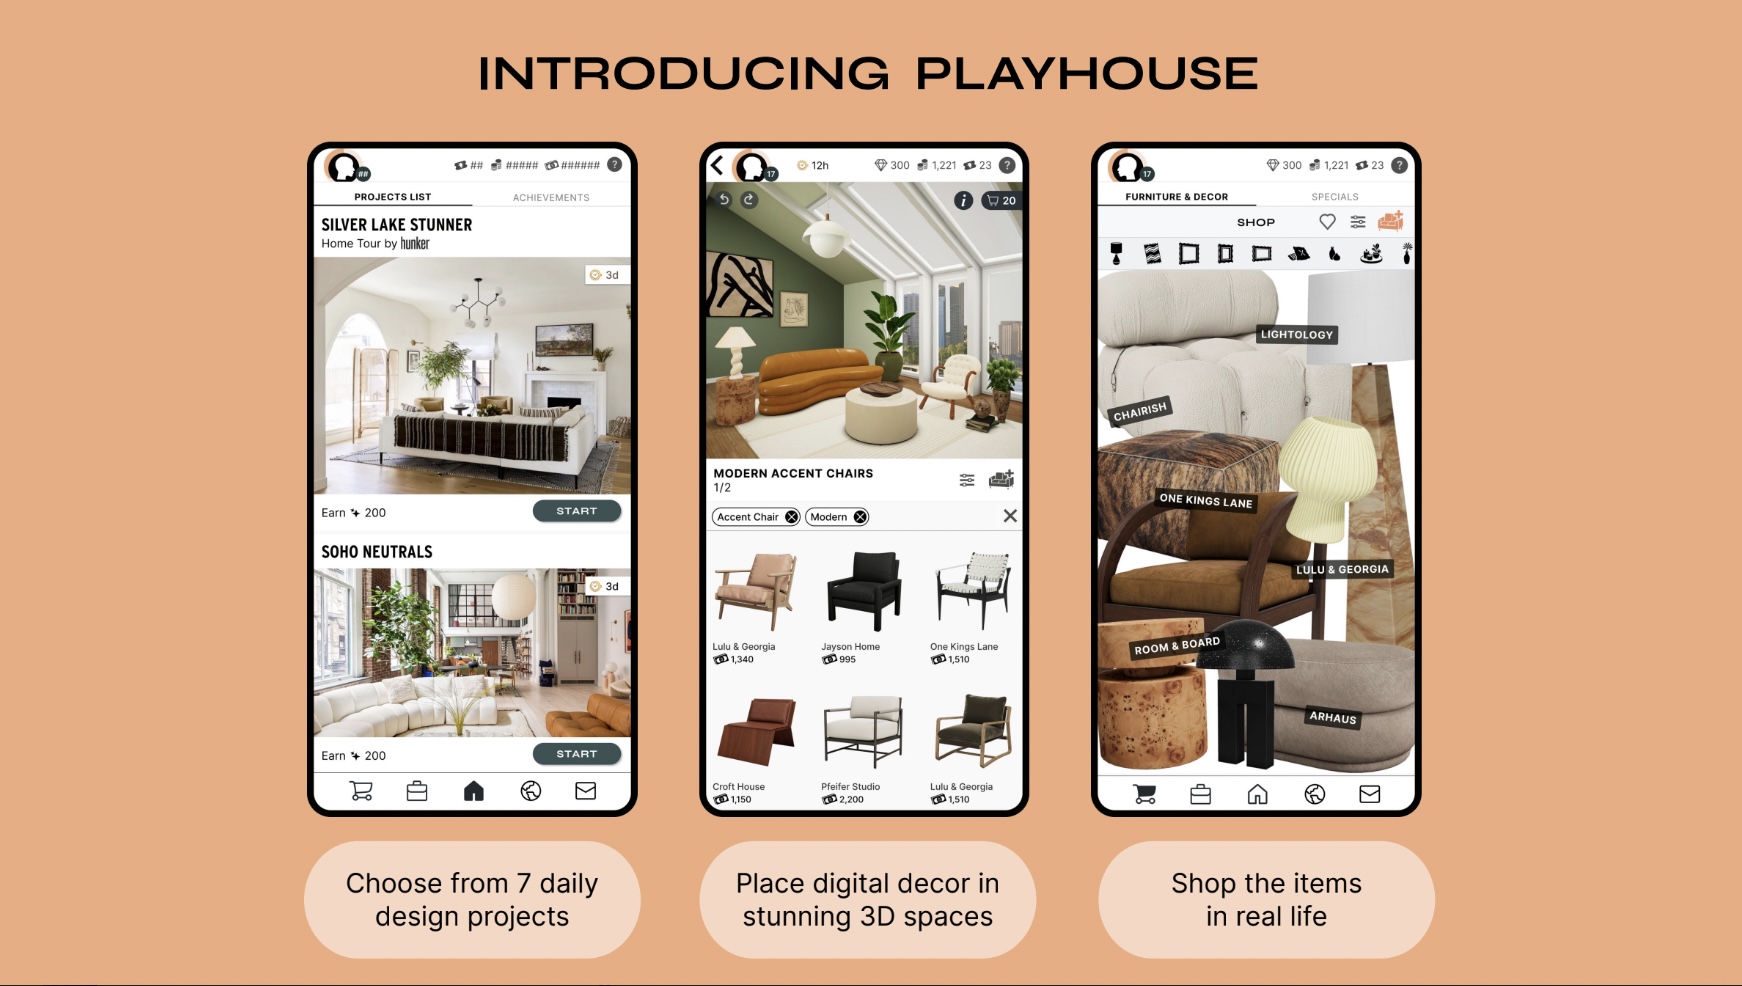 Robin Games debuts PLAYHOUSE, an interior design game you can both play and shop